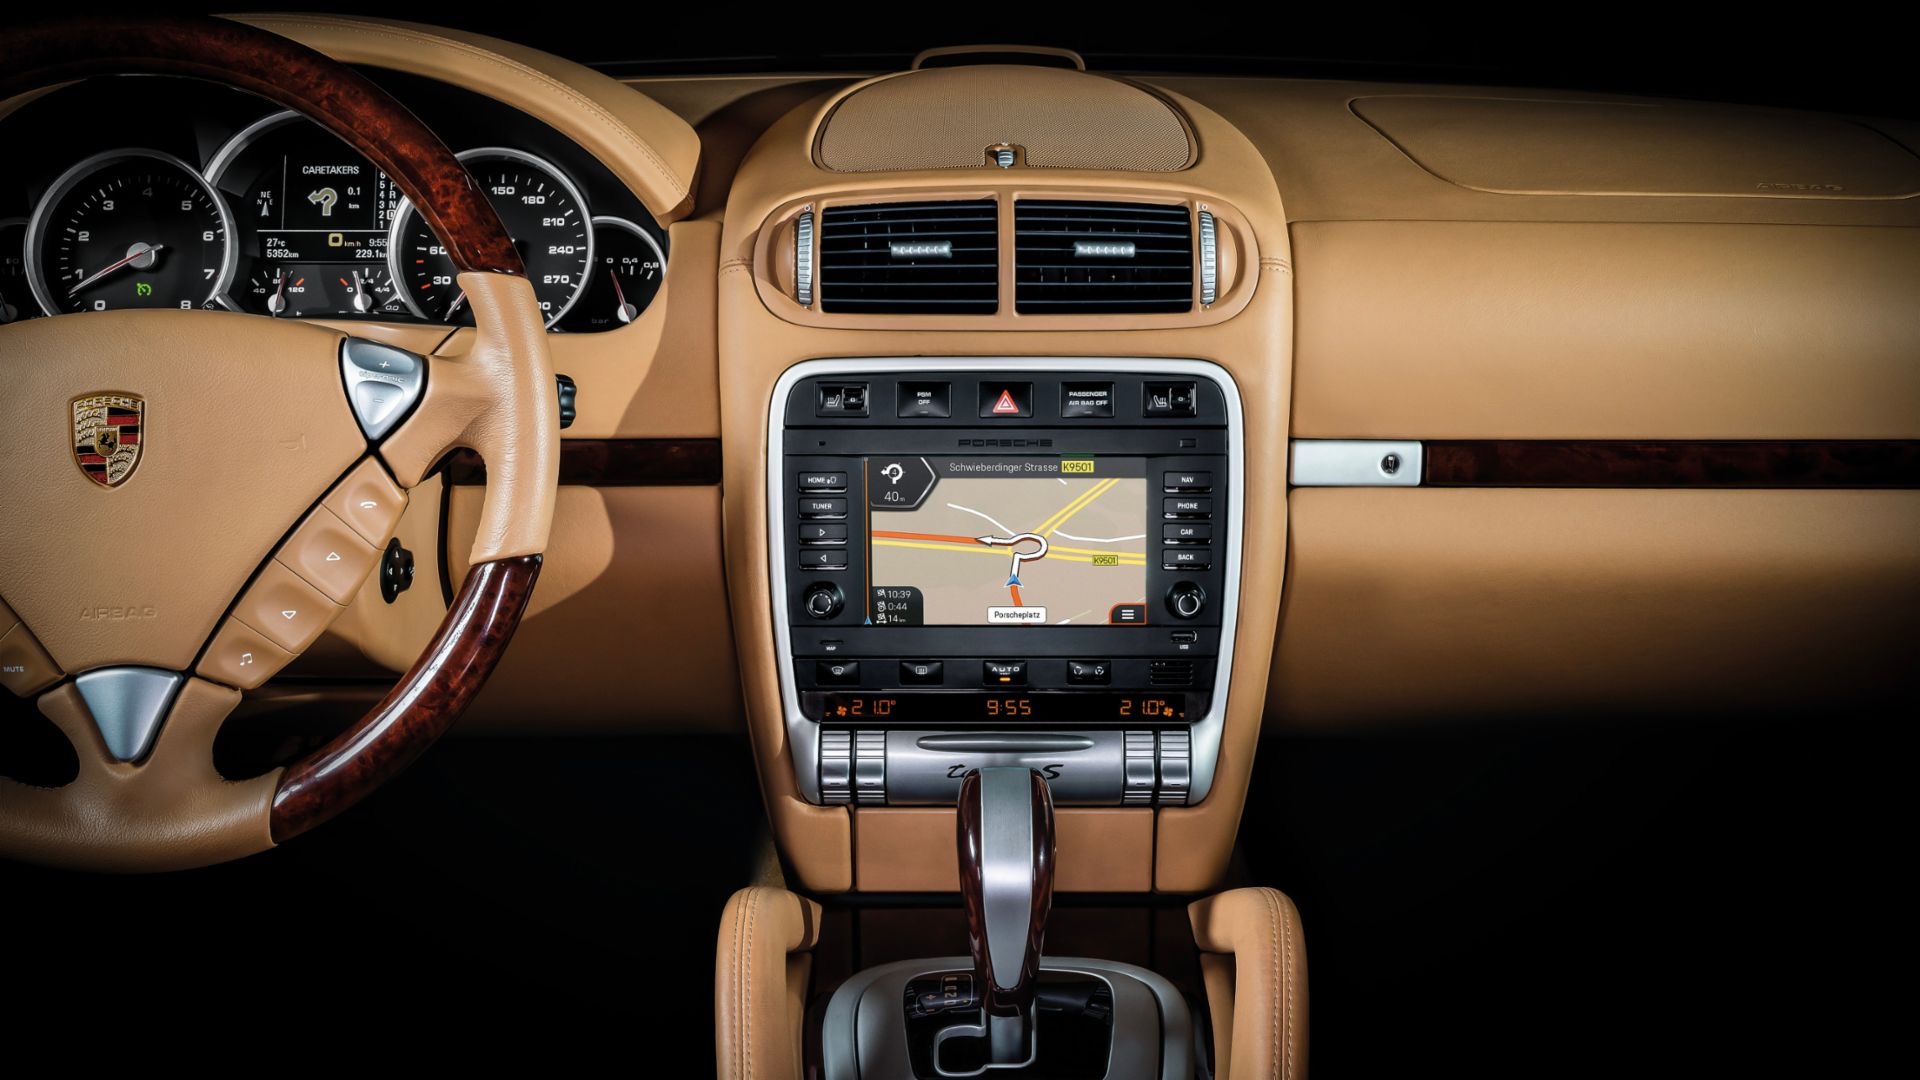 Porsche offers Classic Communication touch-screen for older models